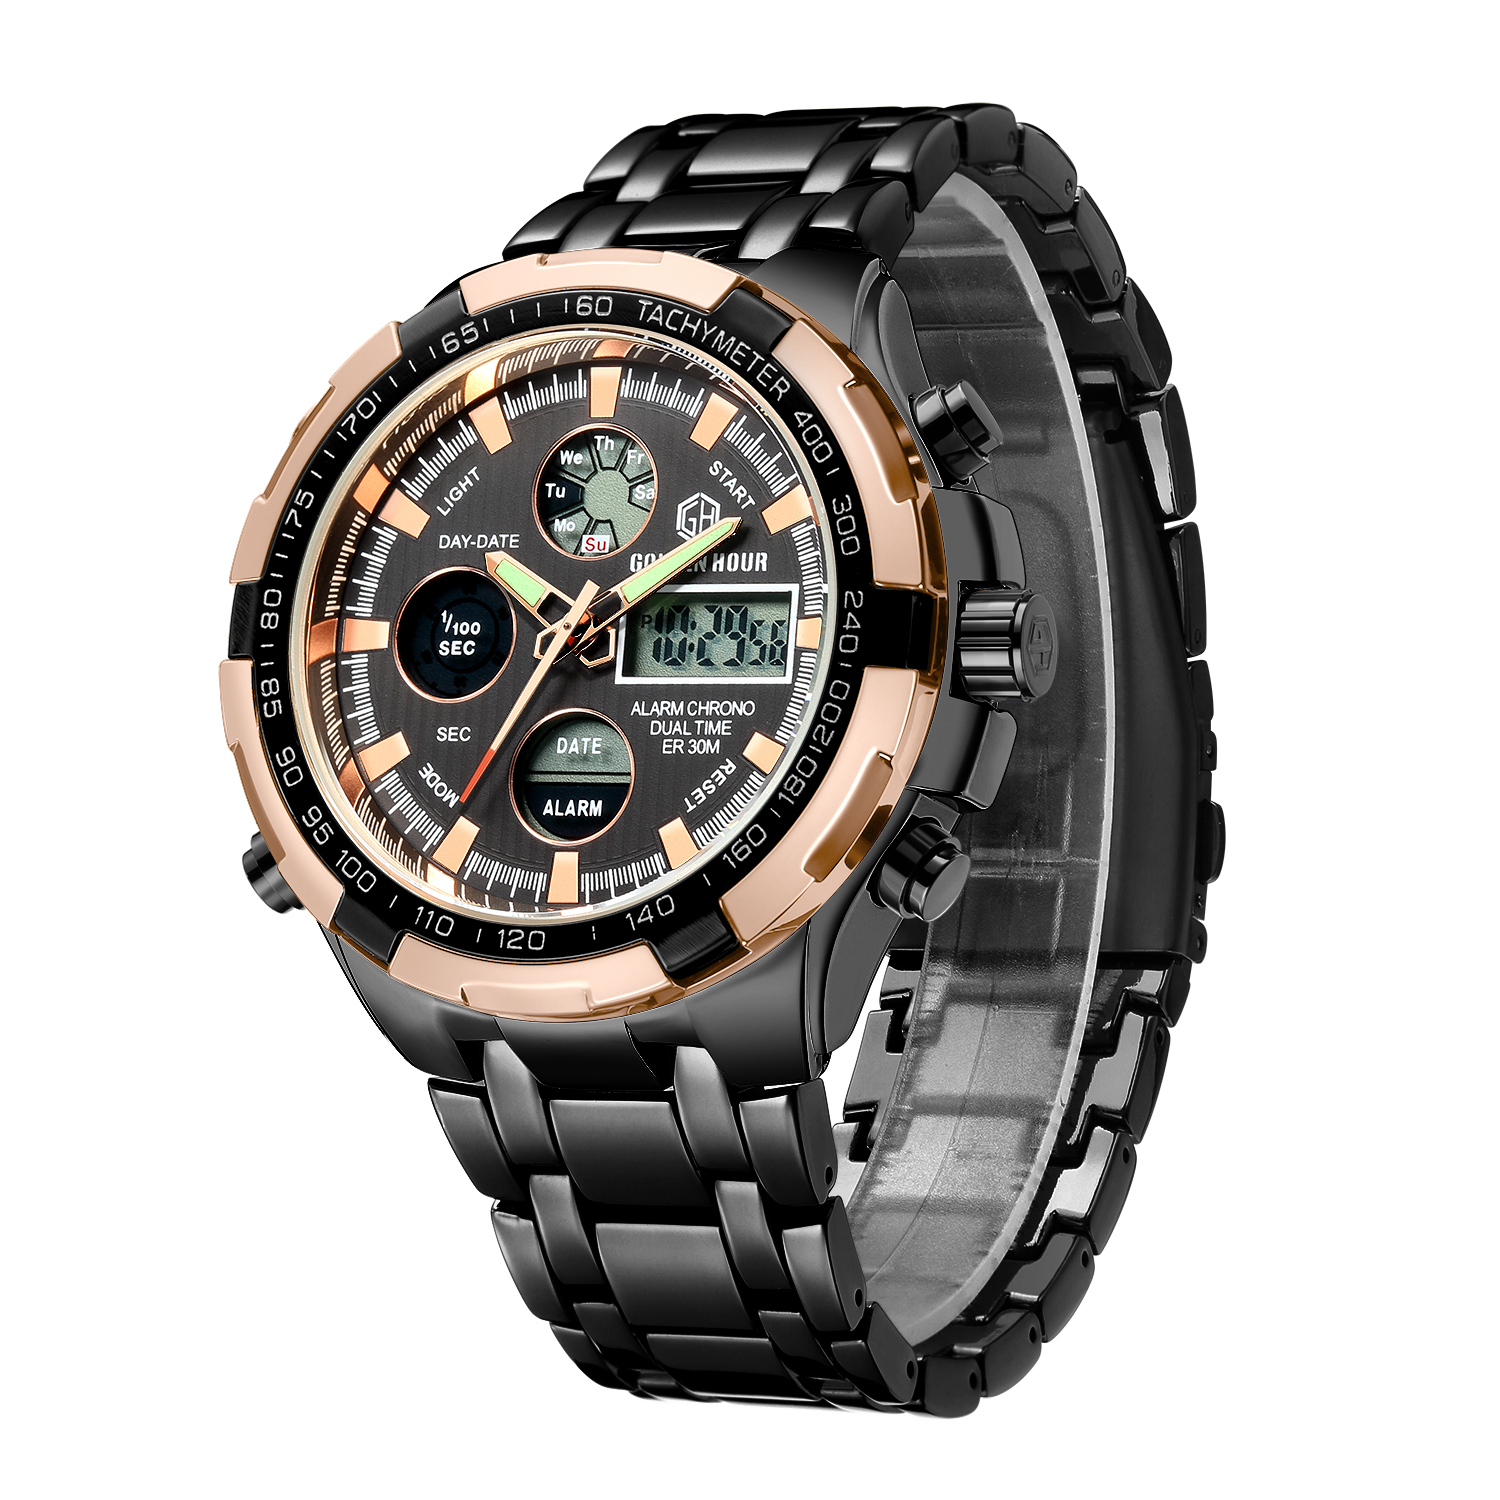 GOLDEN HOUR GH-108-RG-B Mens Stainless Steel Digital Analog Watches